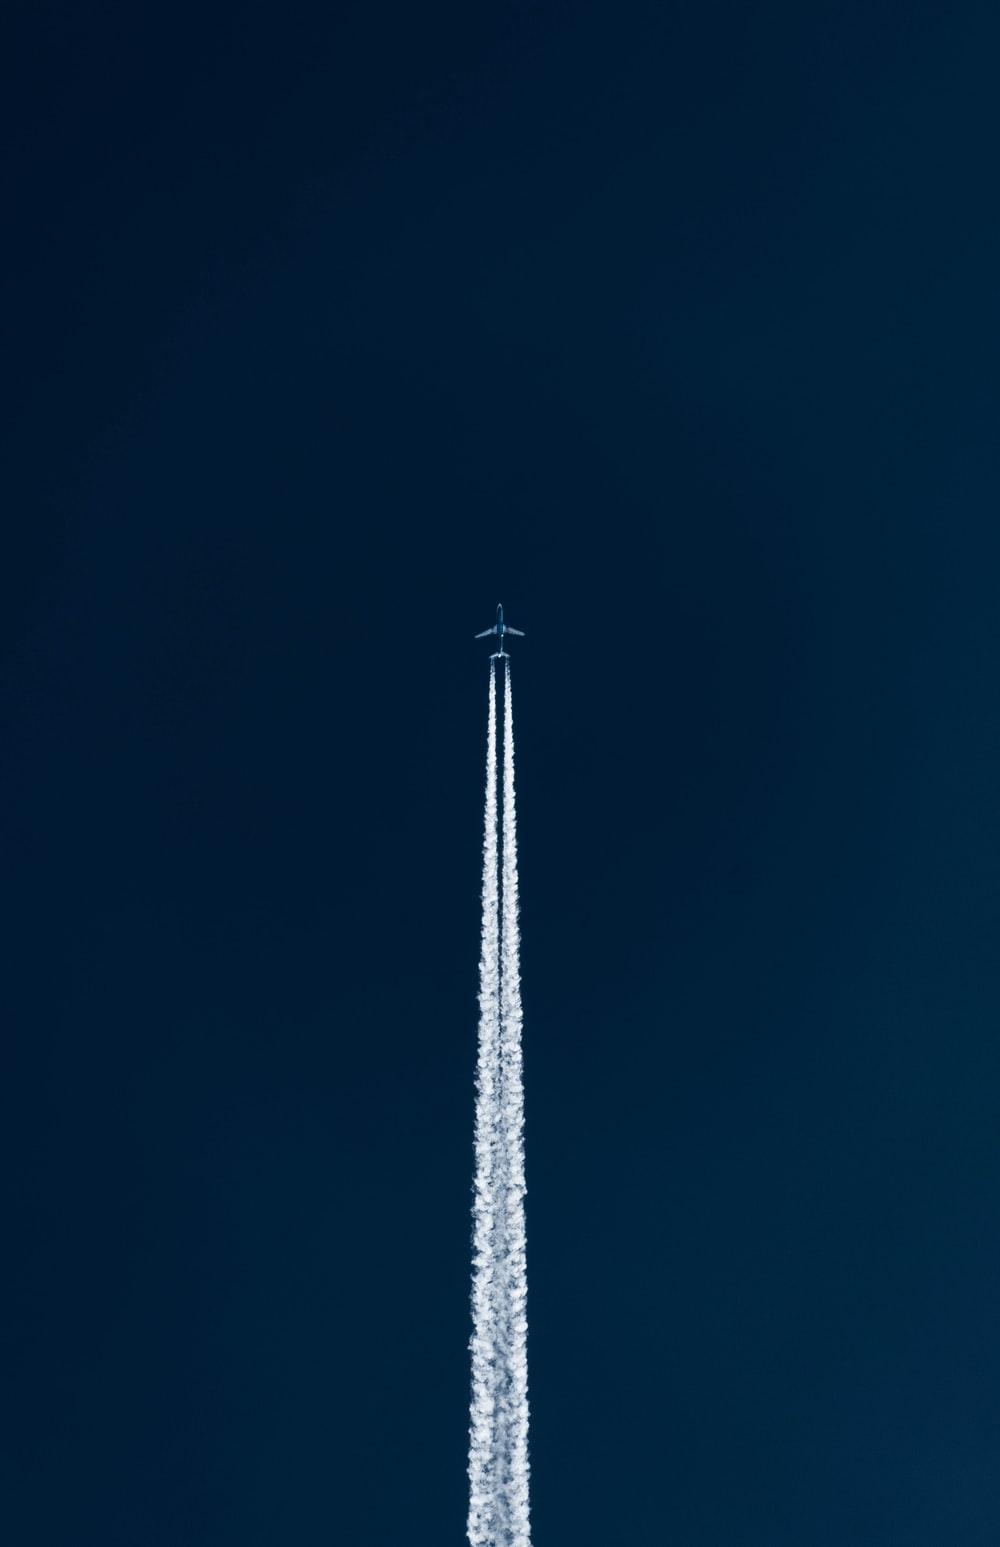 Planes Picture. Download Free Image